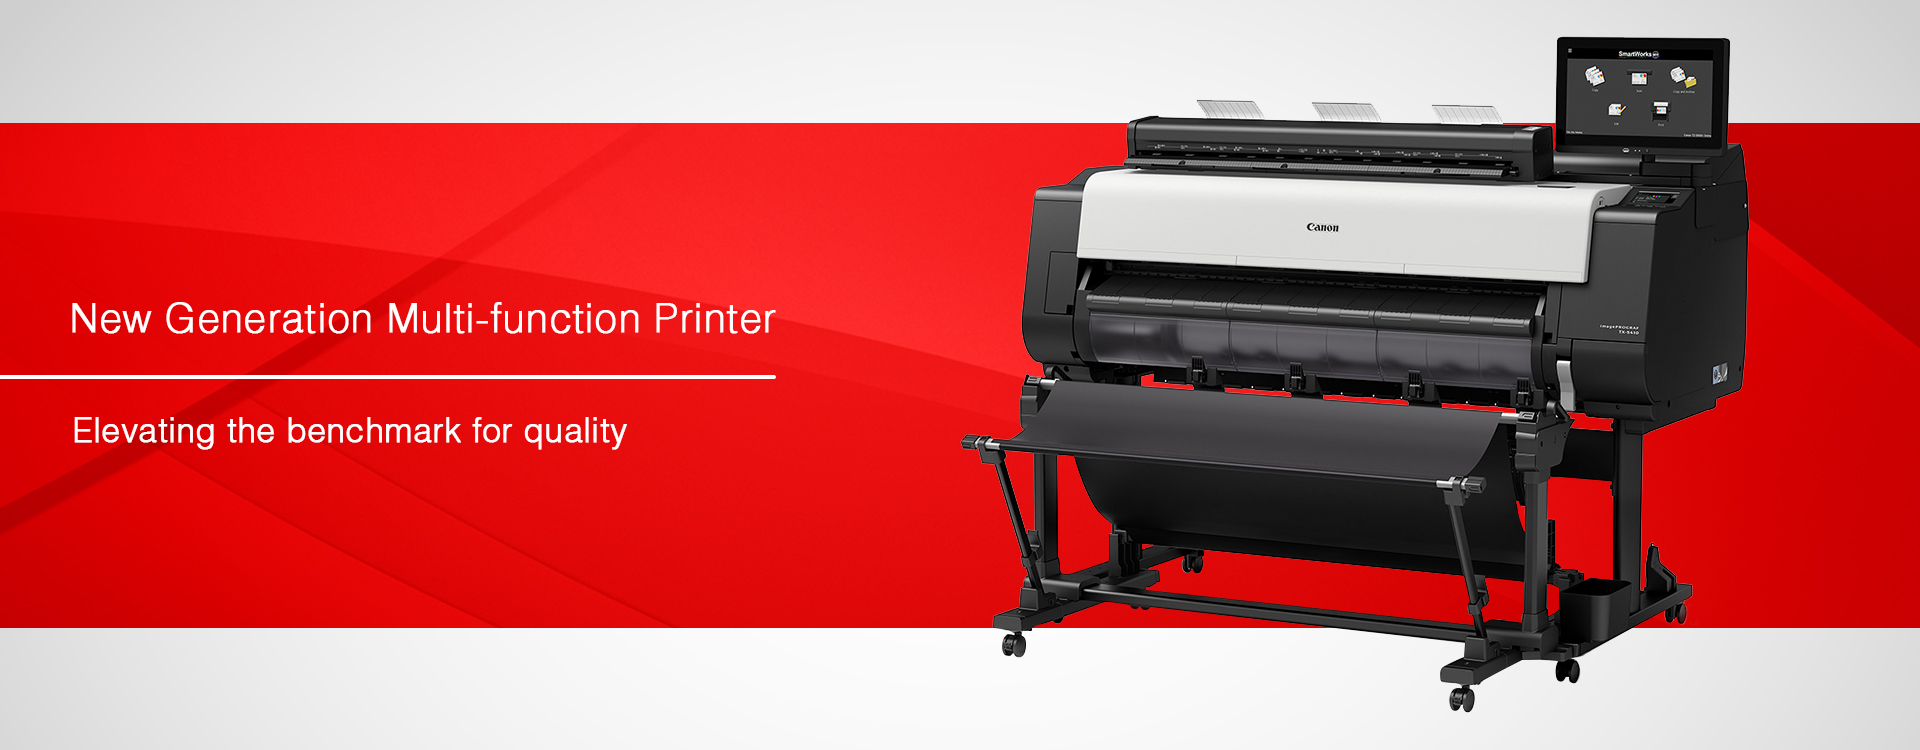 Canon large format printers